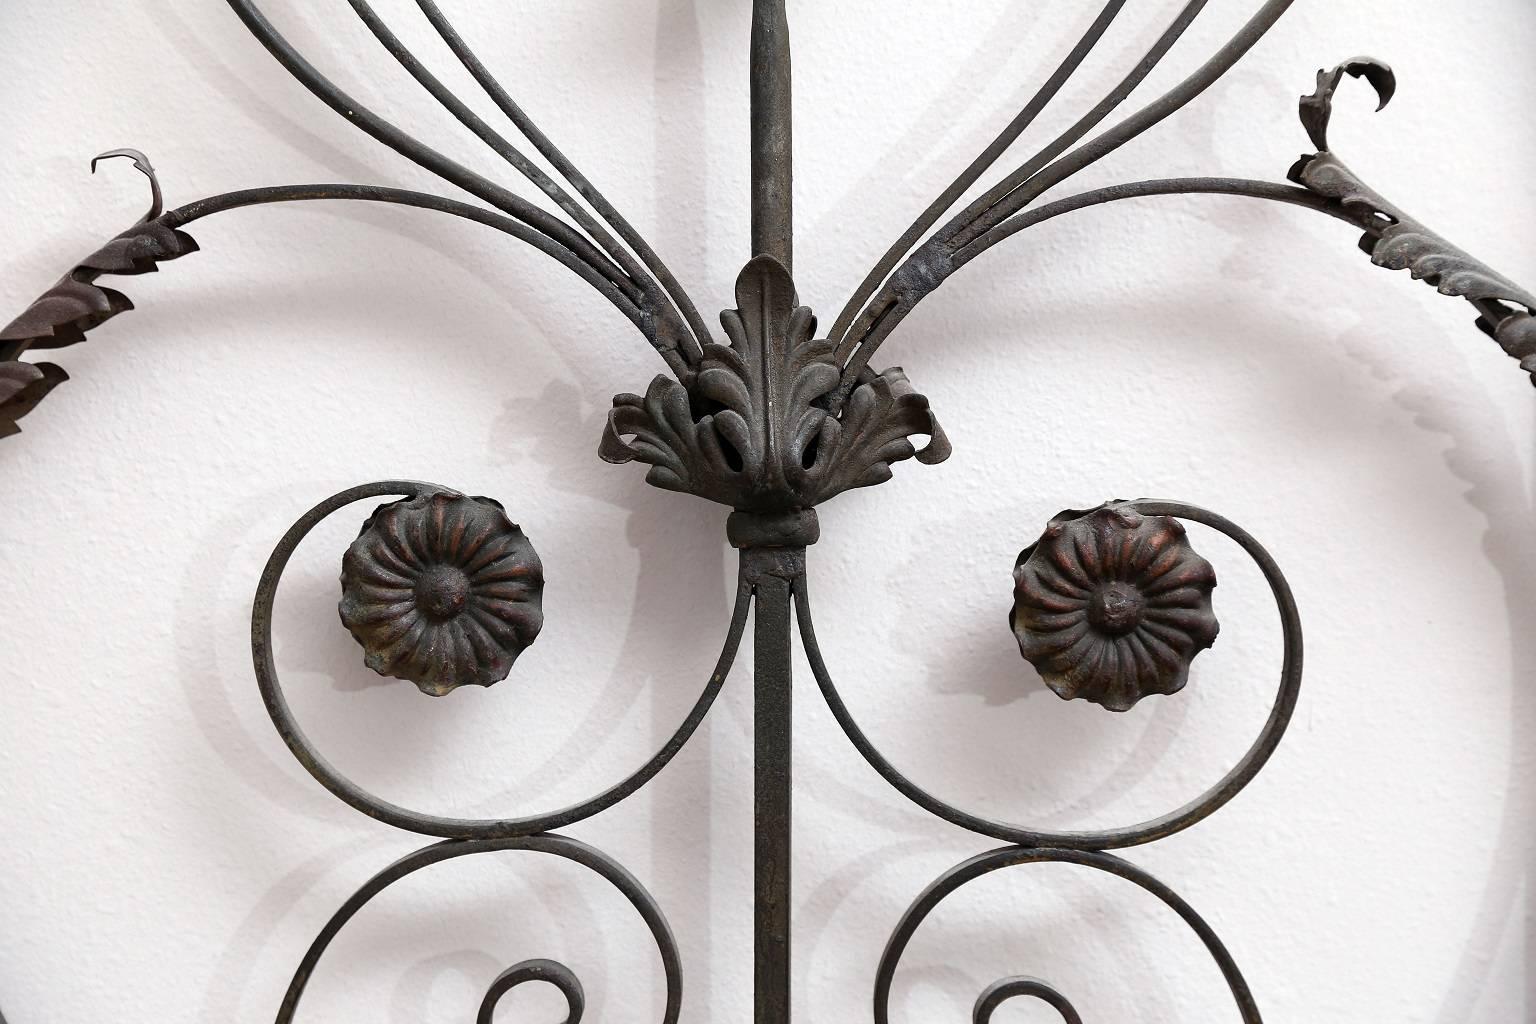 Pair of 19th Century French Forged Iron Gates, later adapted as a Headboard 1